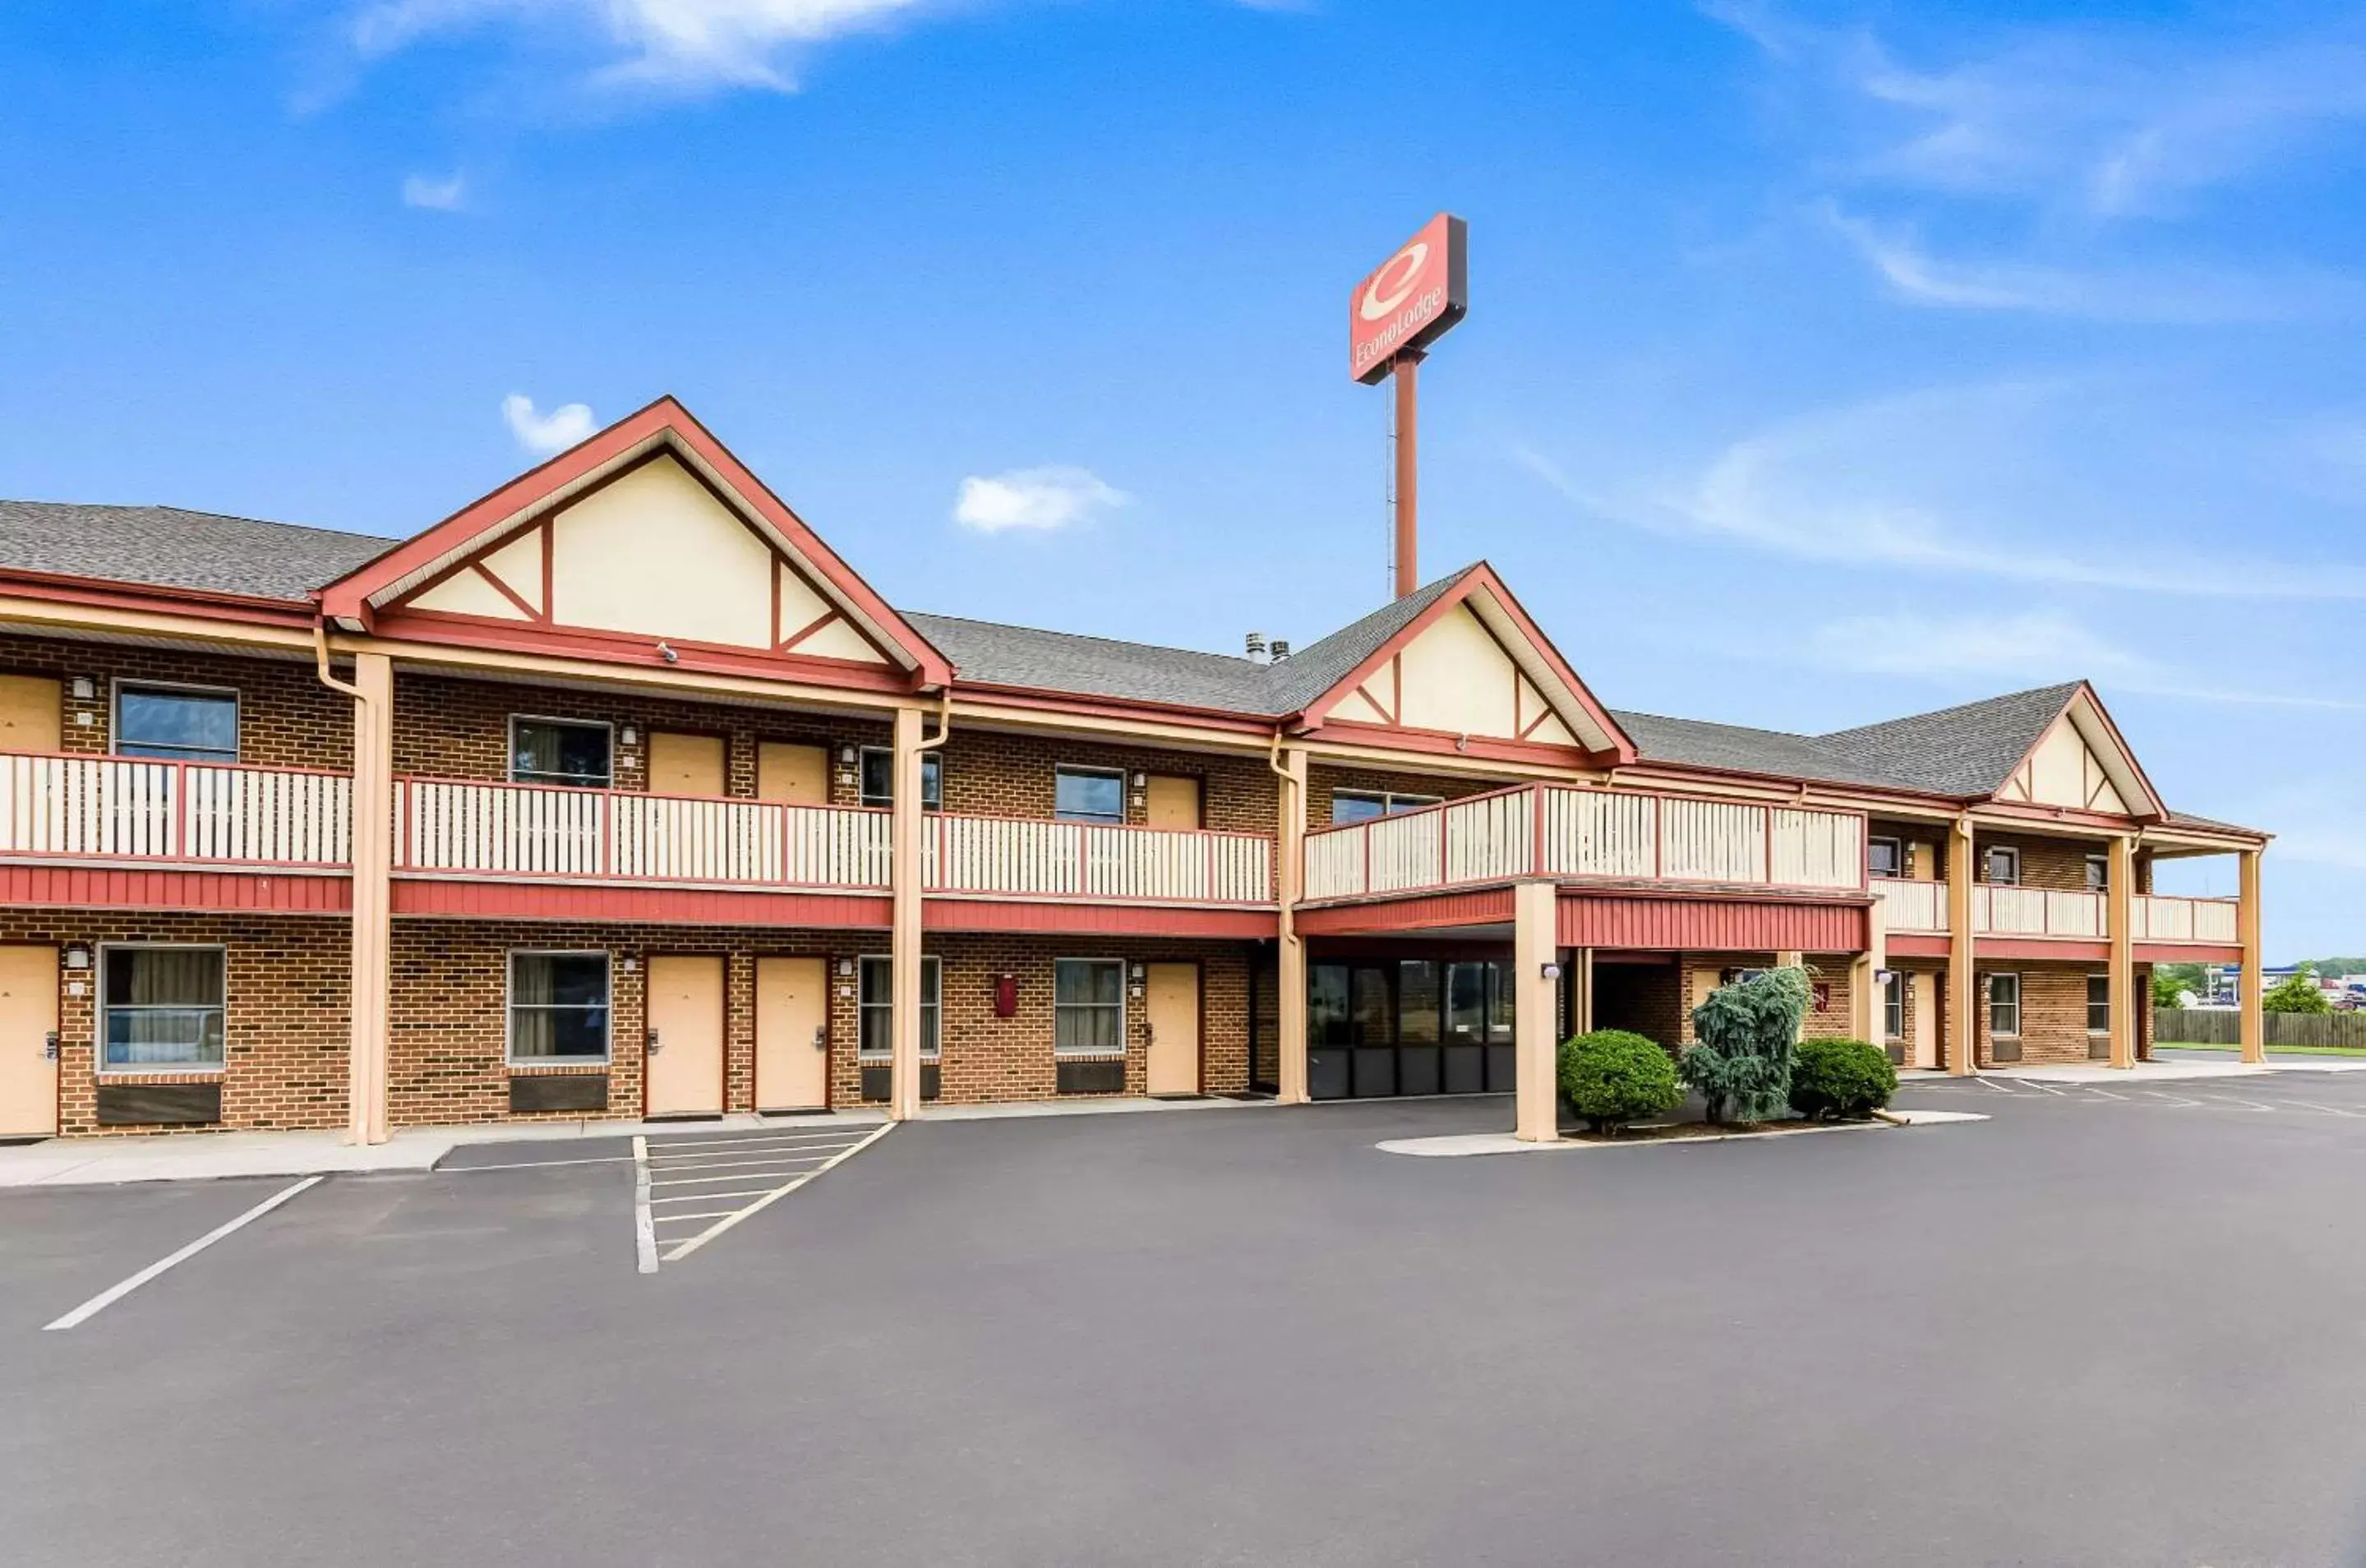 Property Building in Econo Lodge Glade Springs I-81